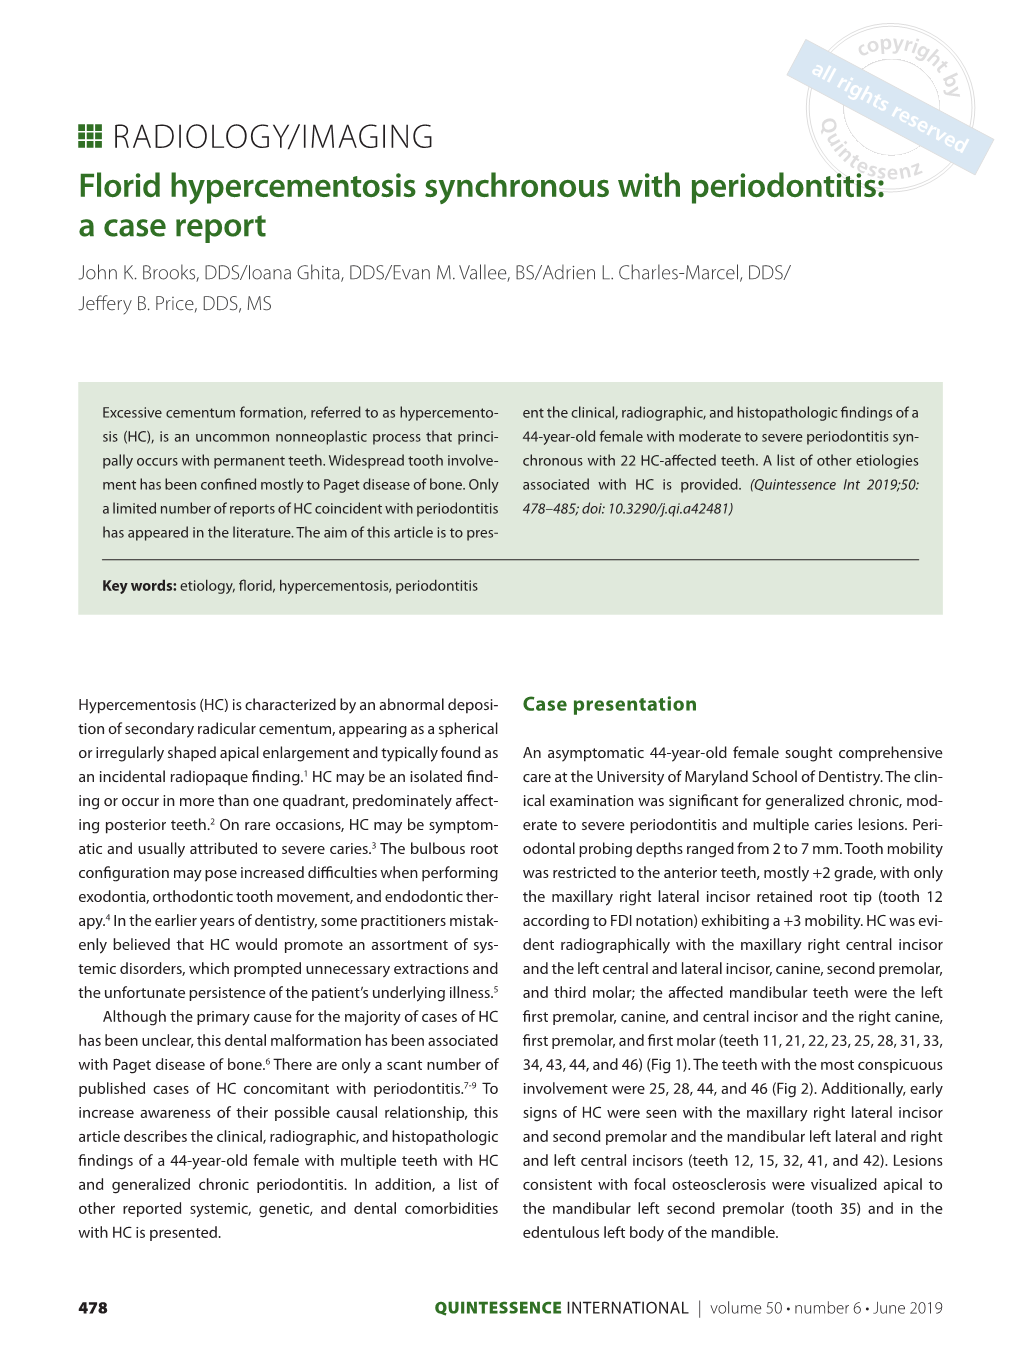 Florid Hypercementosis Synchronous with Periodontitis: a Case Report John K